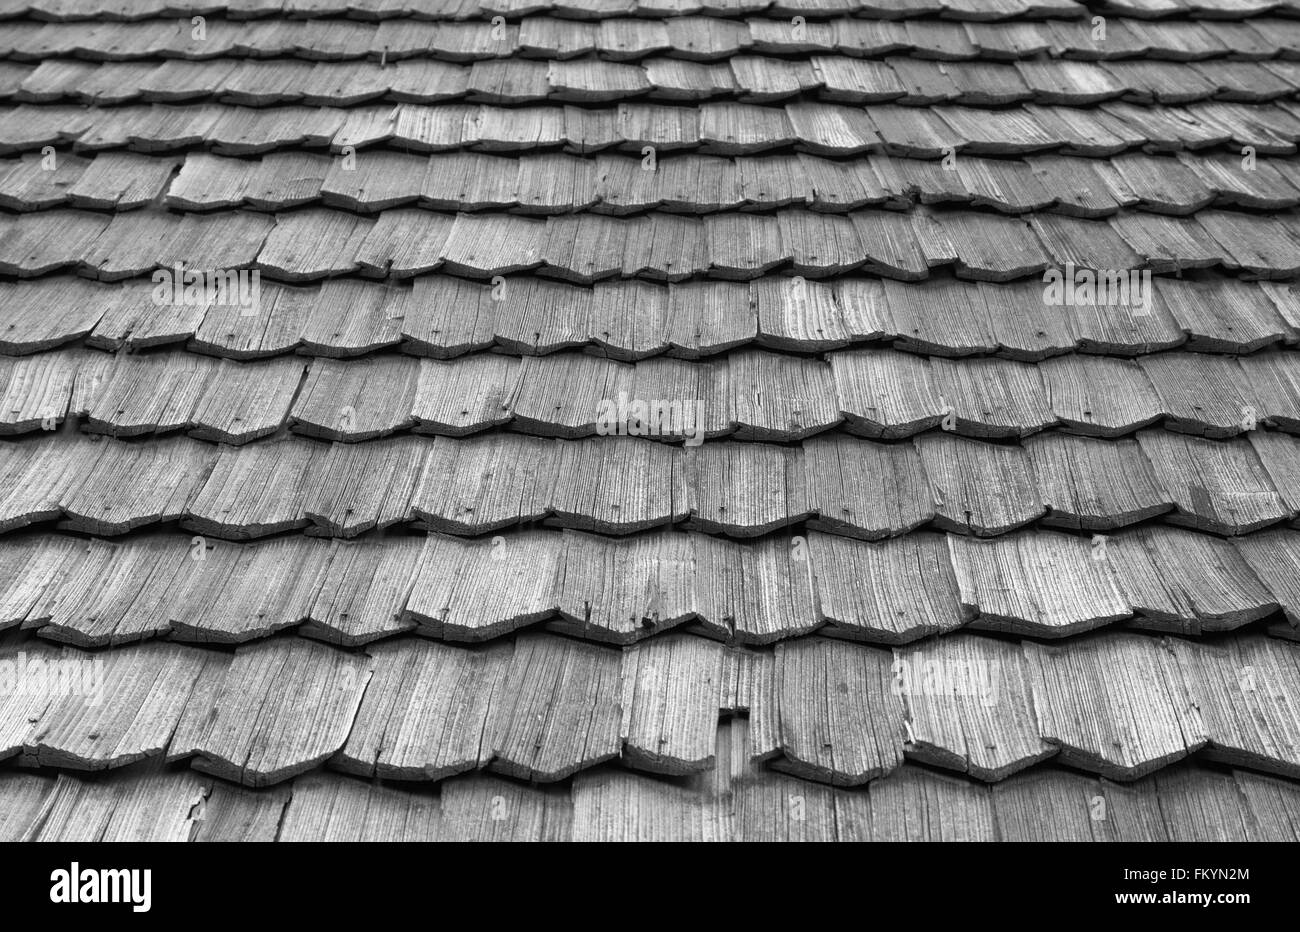 Close-up of the old wood shingle roof Stock Photo